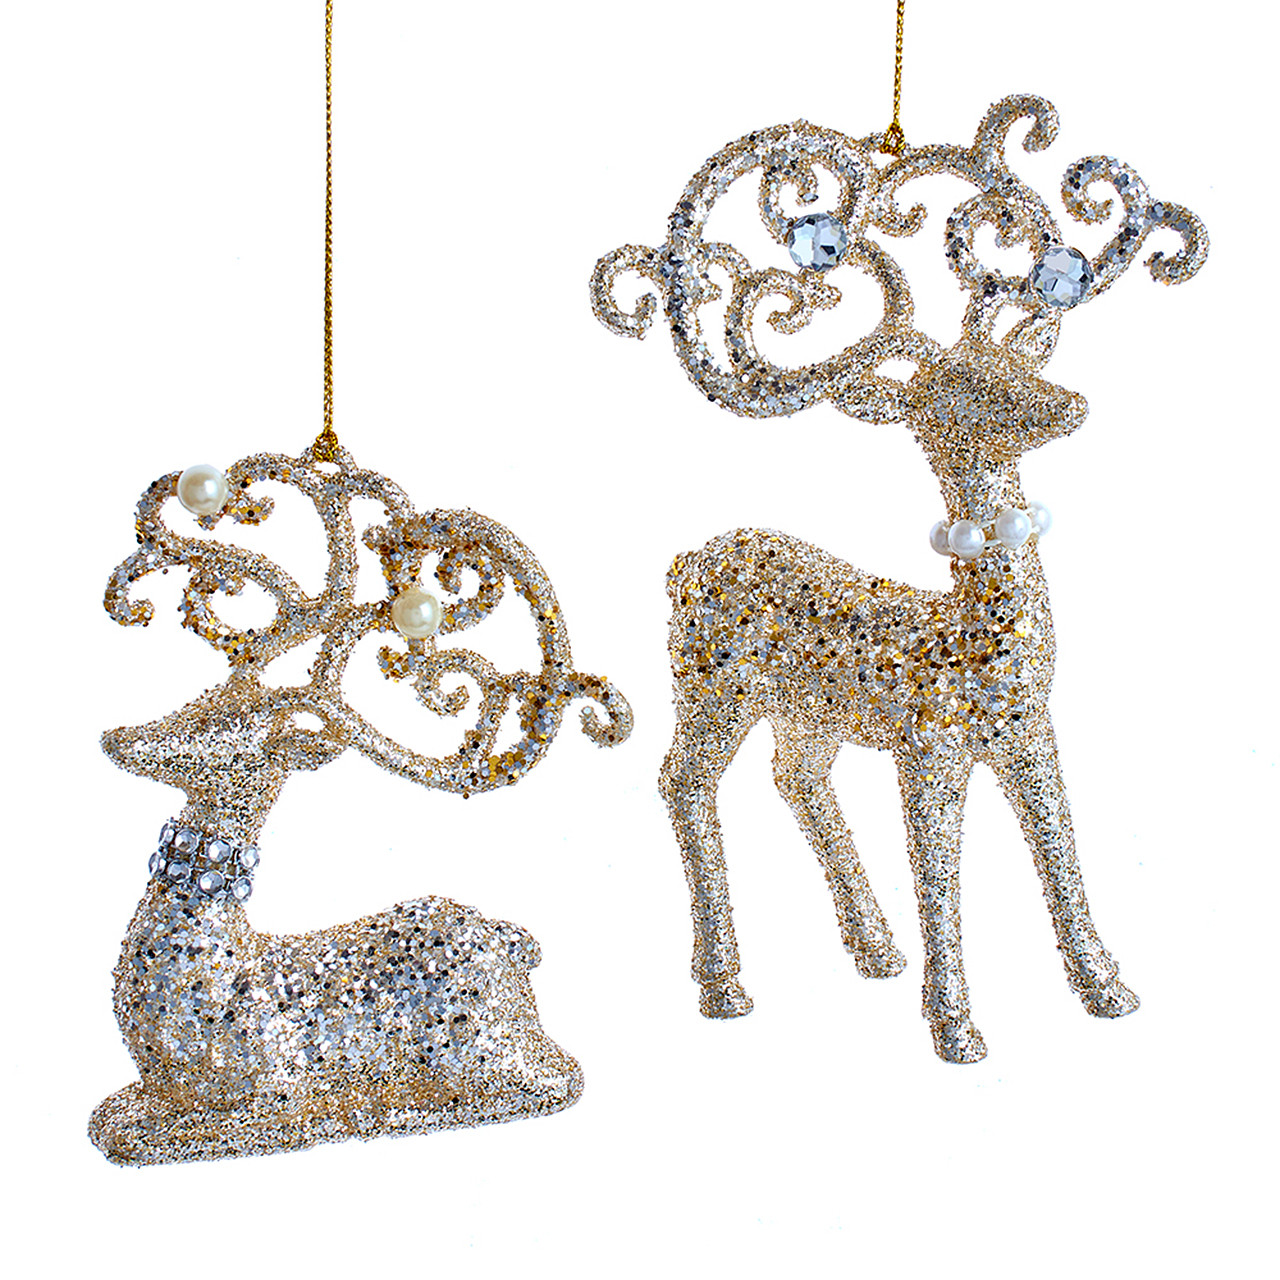 In-Store Only - 5.7 in. Platinum Deer Ornaments, Assortment of 2